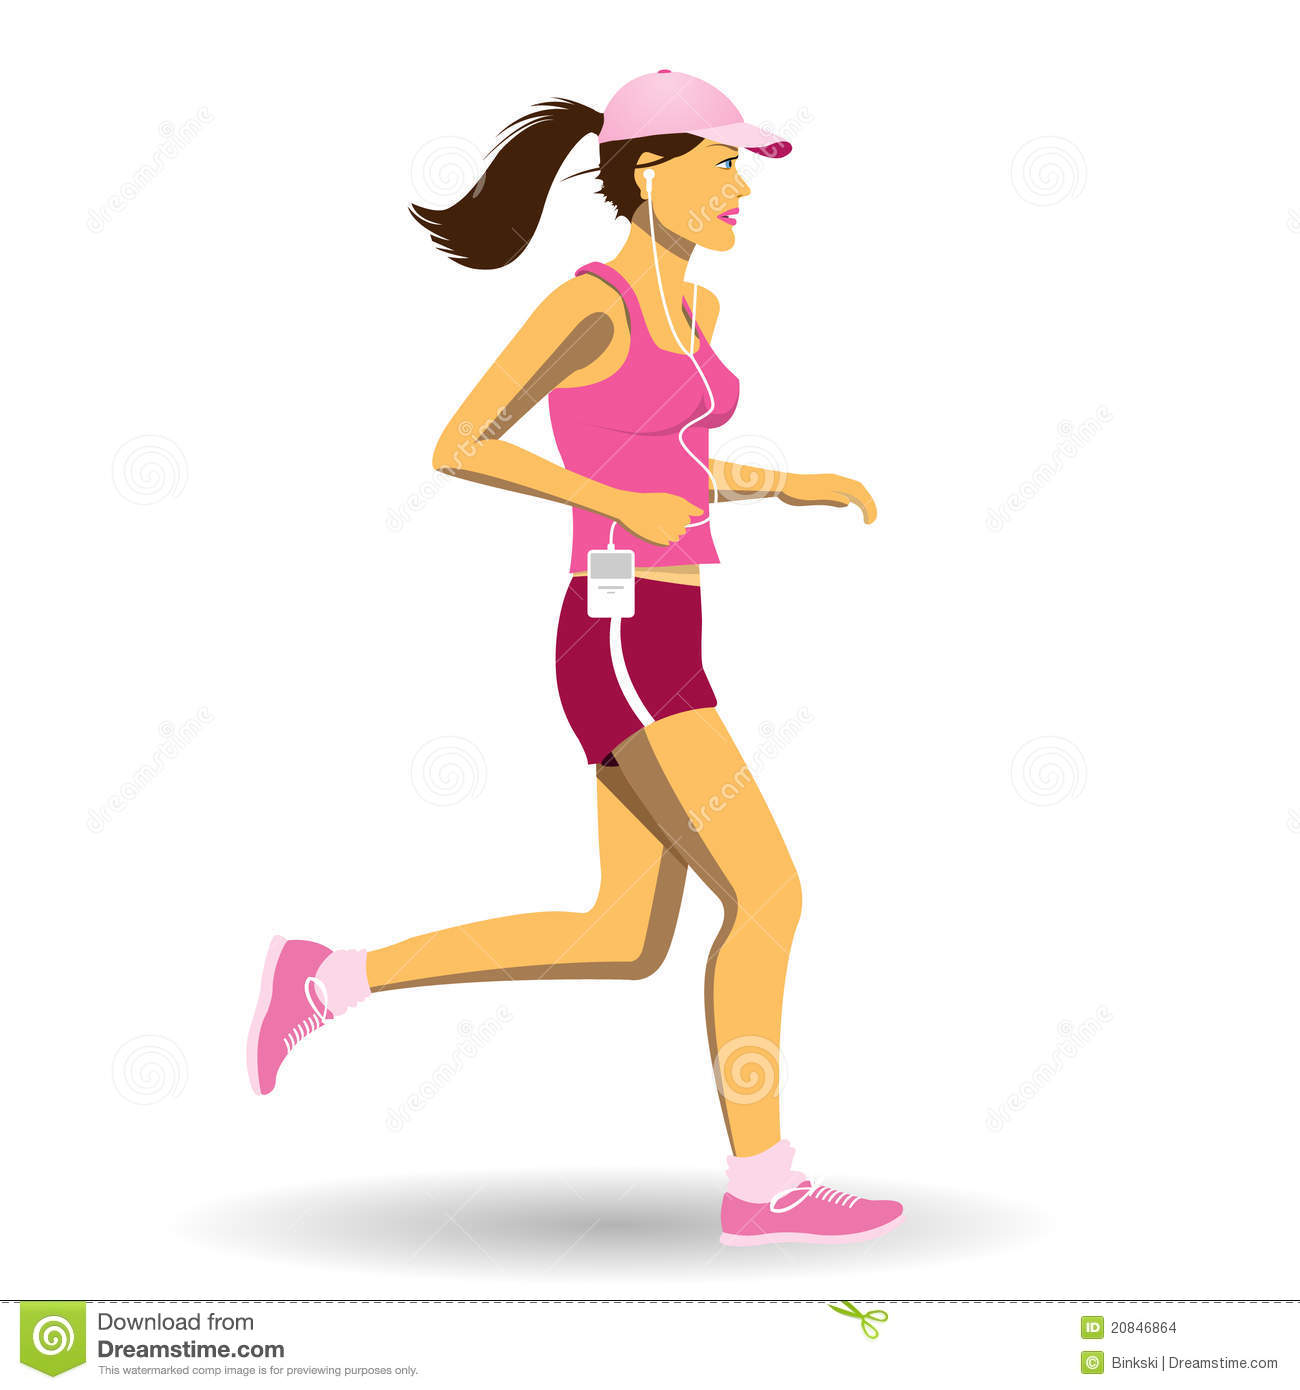 Woman Jogging Stock Images   Image  20846864